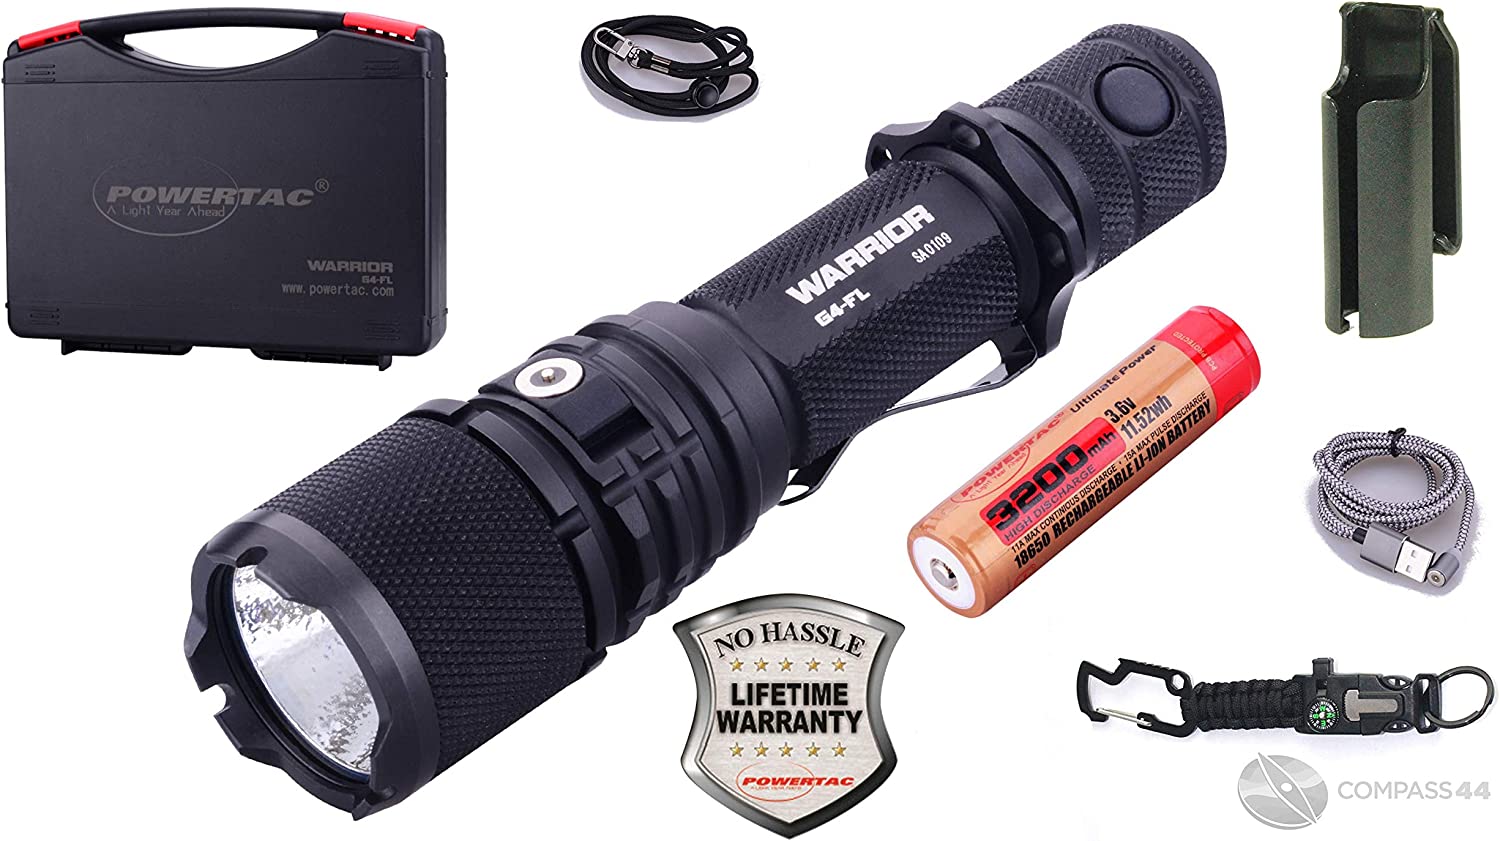 PowerTac Warrior G4-FL Wide Beam 4200 Lumen USB Rechargeable LED Police Duty Compact Powerful Tactical Flashlight Dual-Charging System Hard Shell Holster with Compass 44 8-in-1 Tactical Keychain